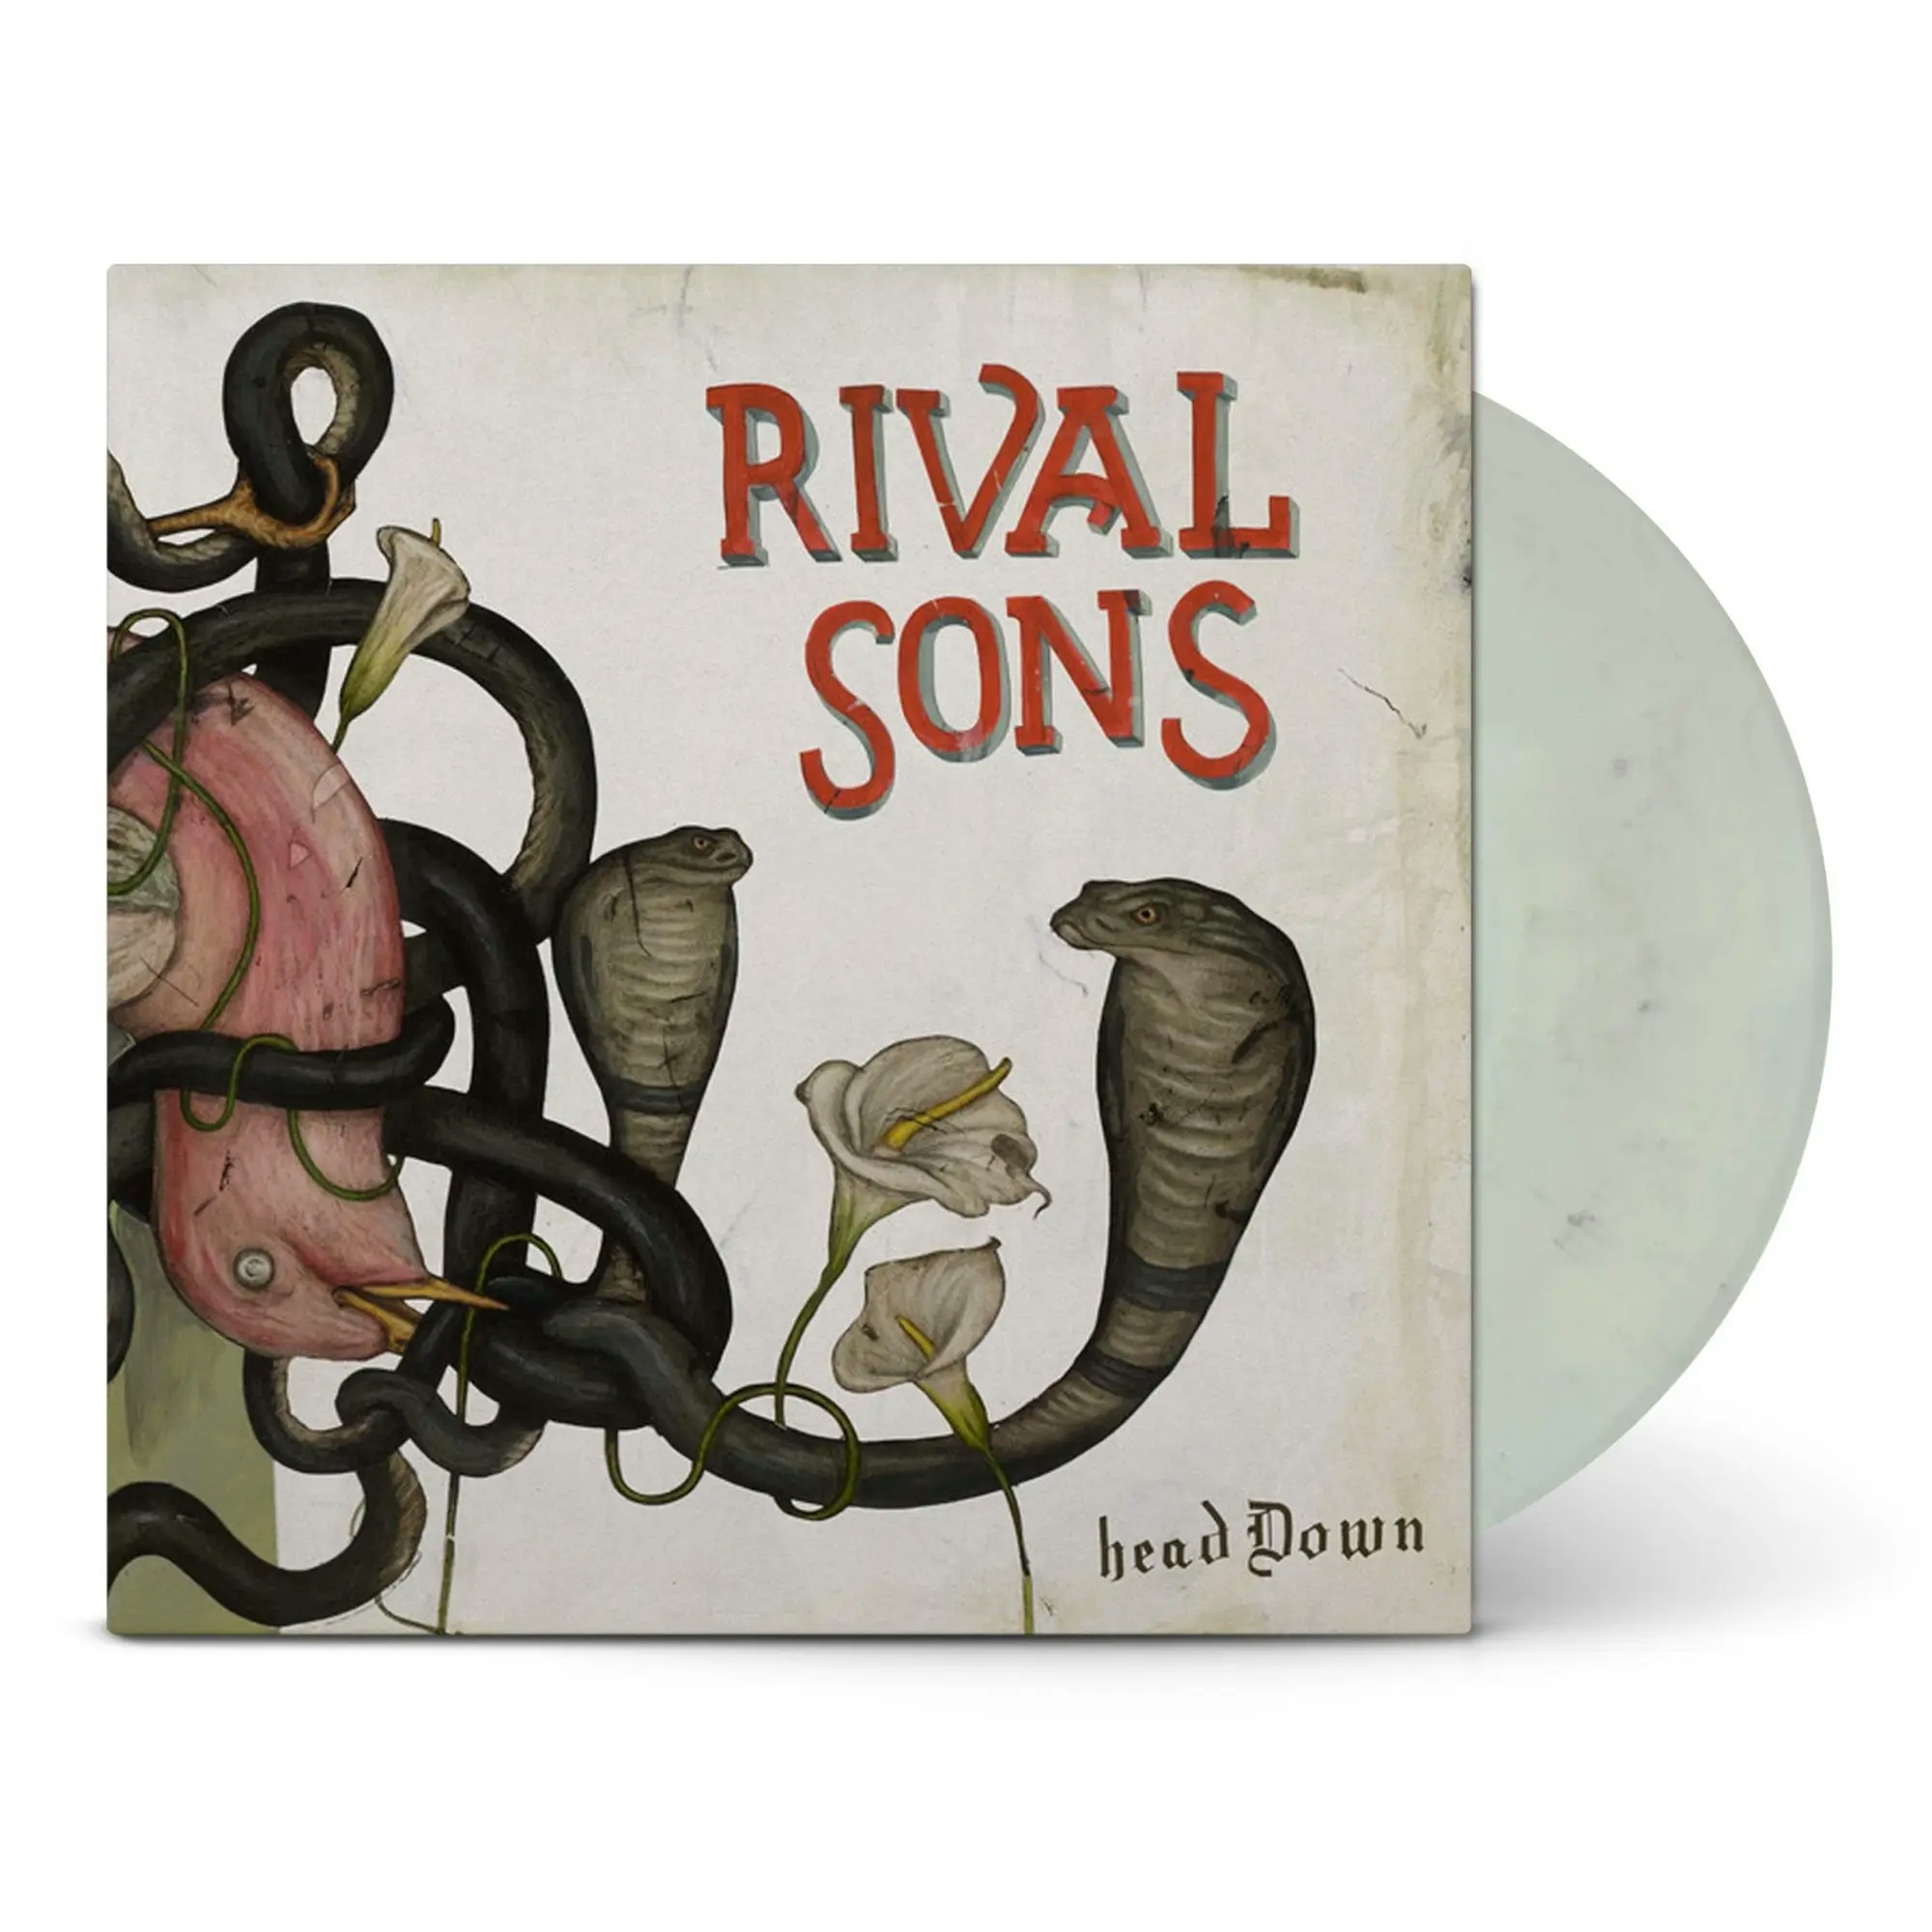 Album artwork for Head Down by Rival Sons